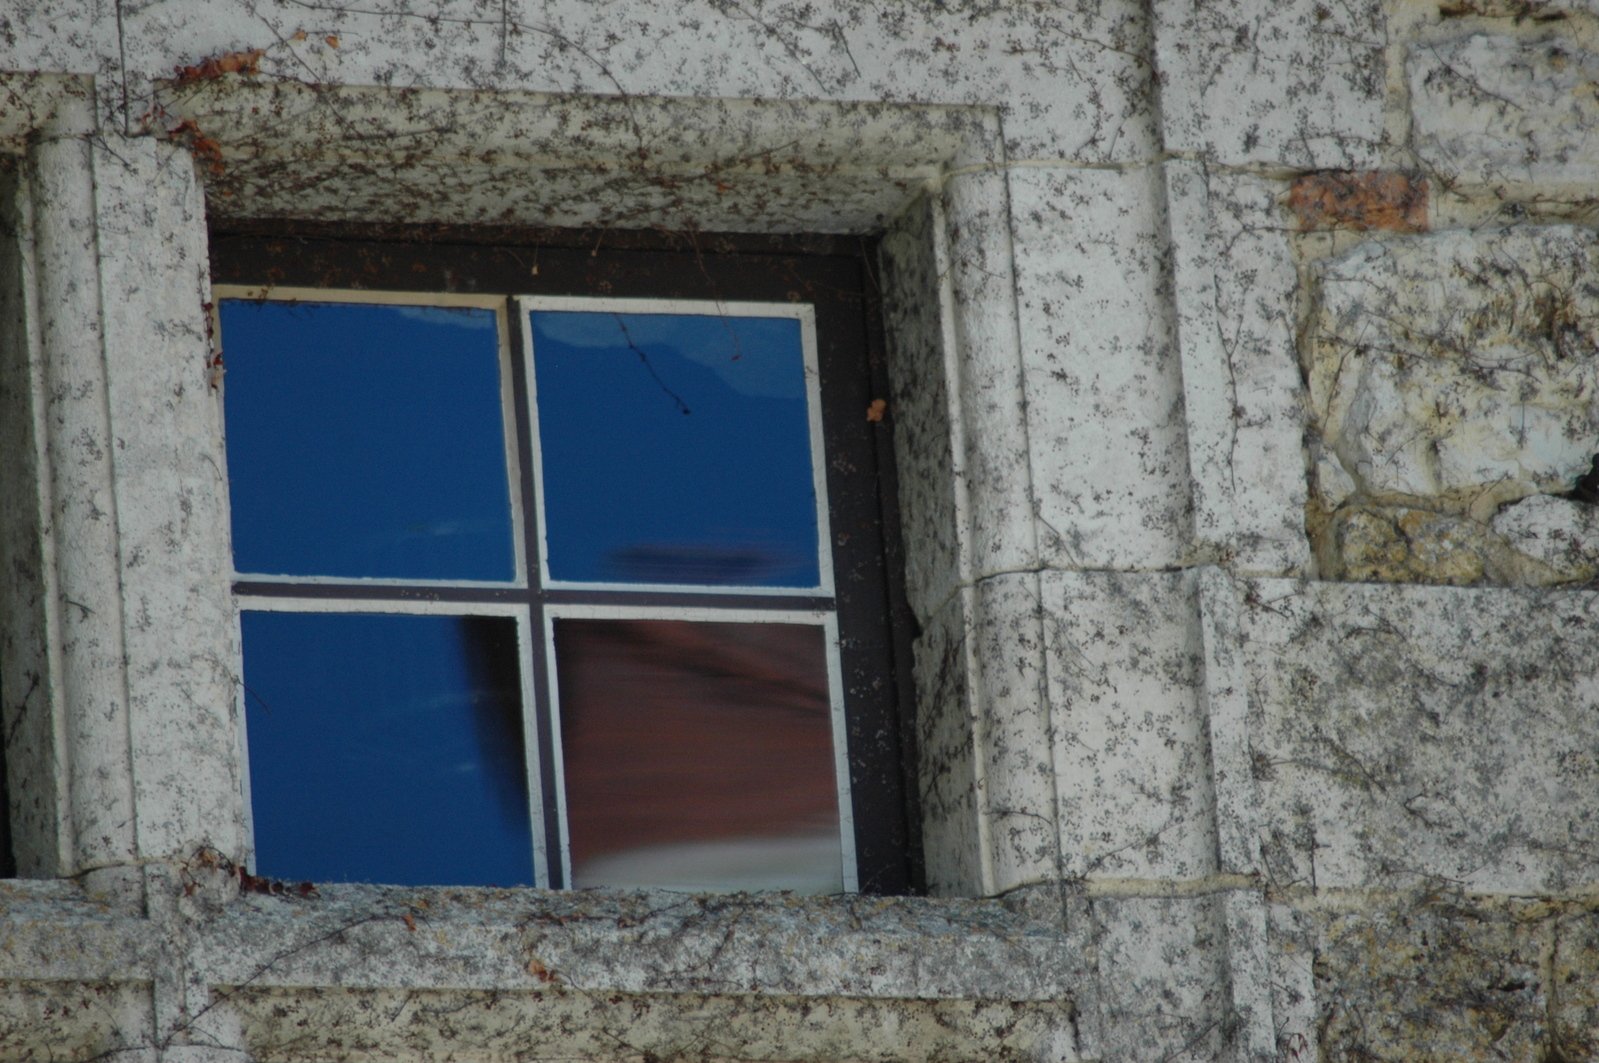 a window is displayed in an old stone building